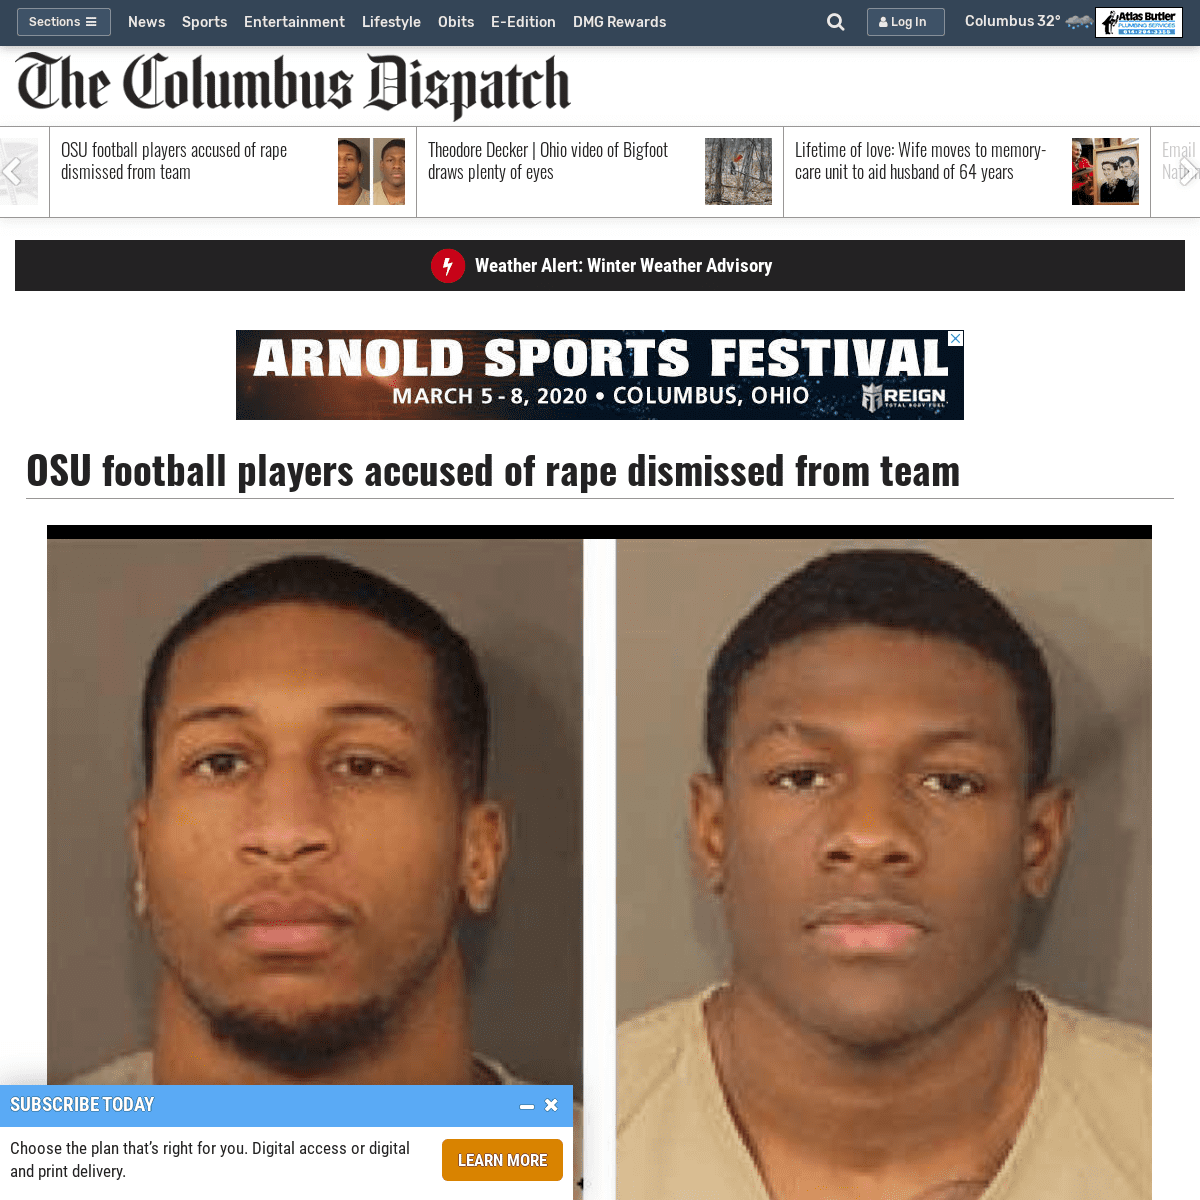 A complete backup of www.dispatch.com/news/20200212/osu-football-players-accused-of-rape-dismissed-from-team